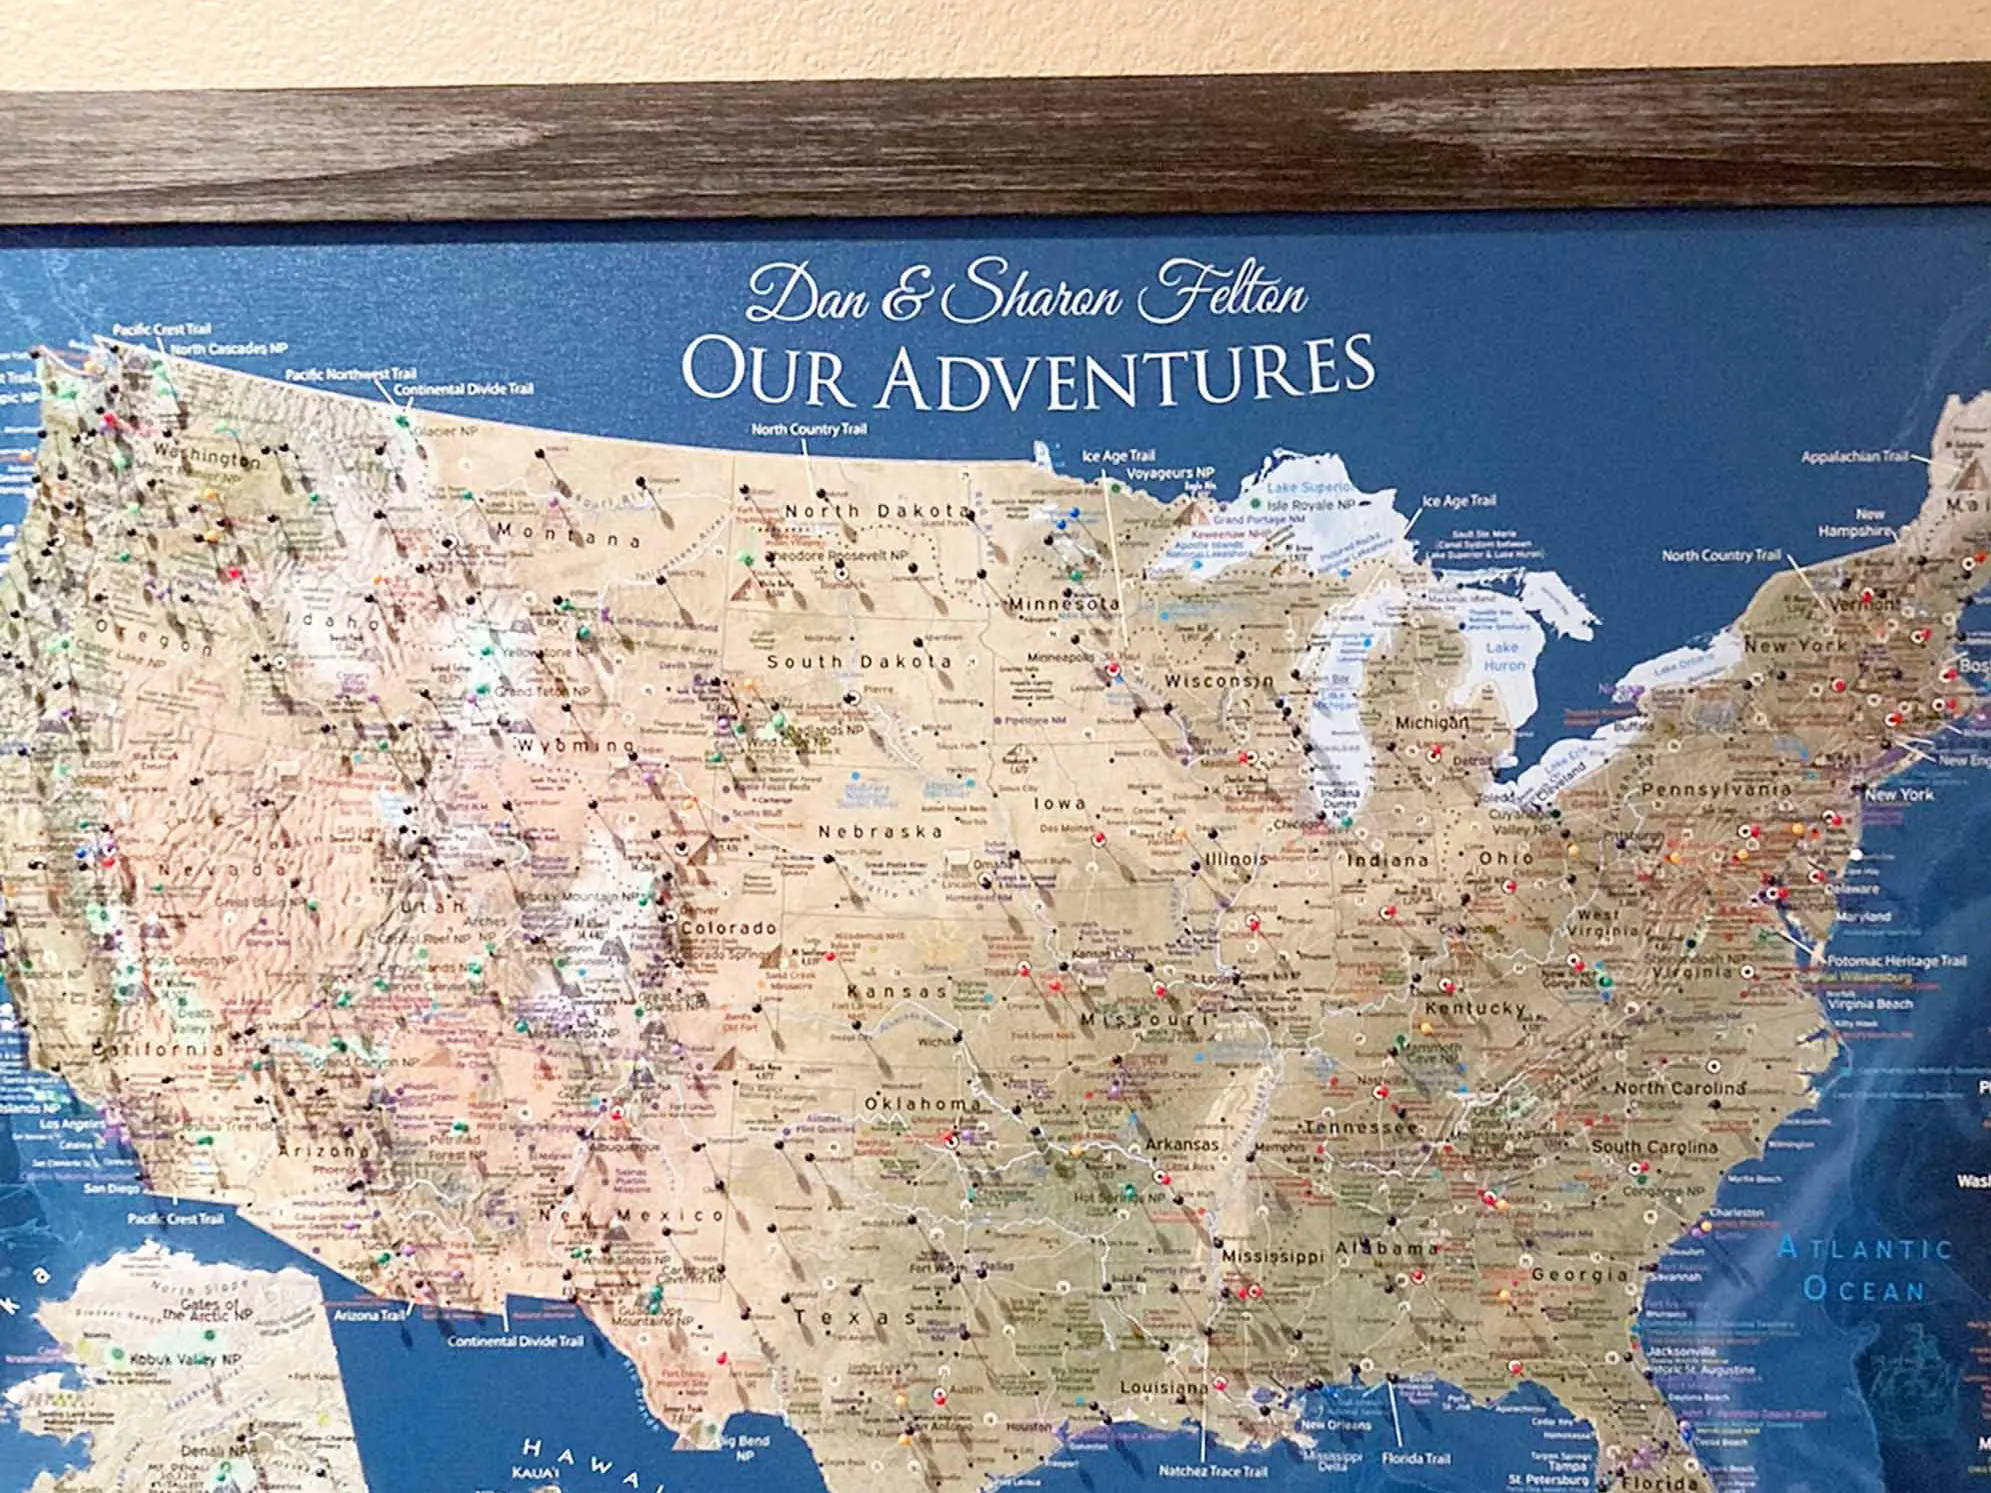 Create your own national park map